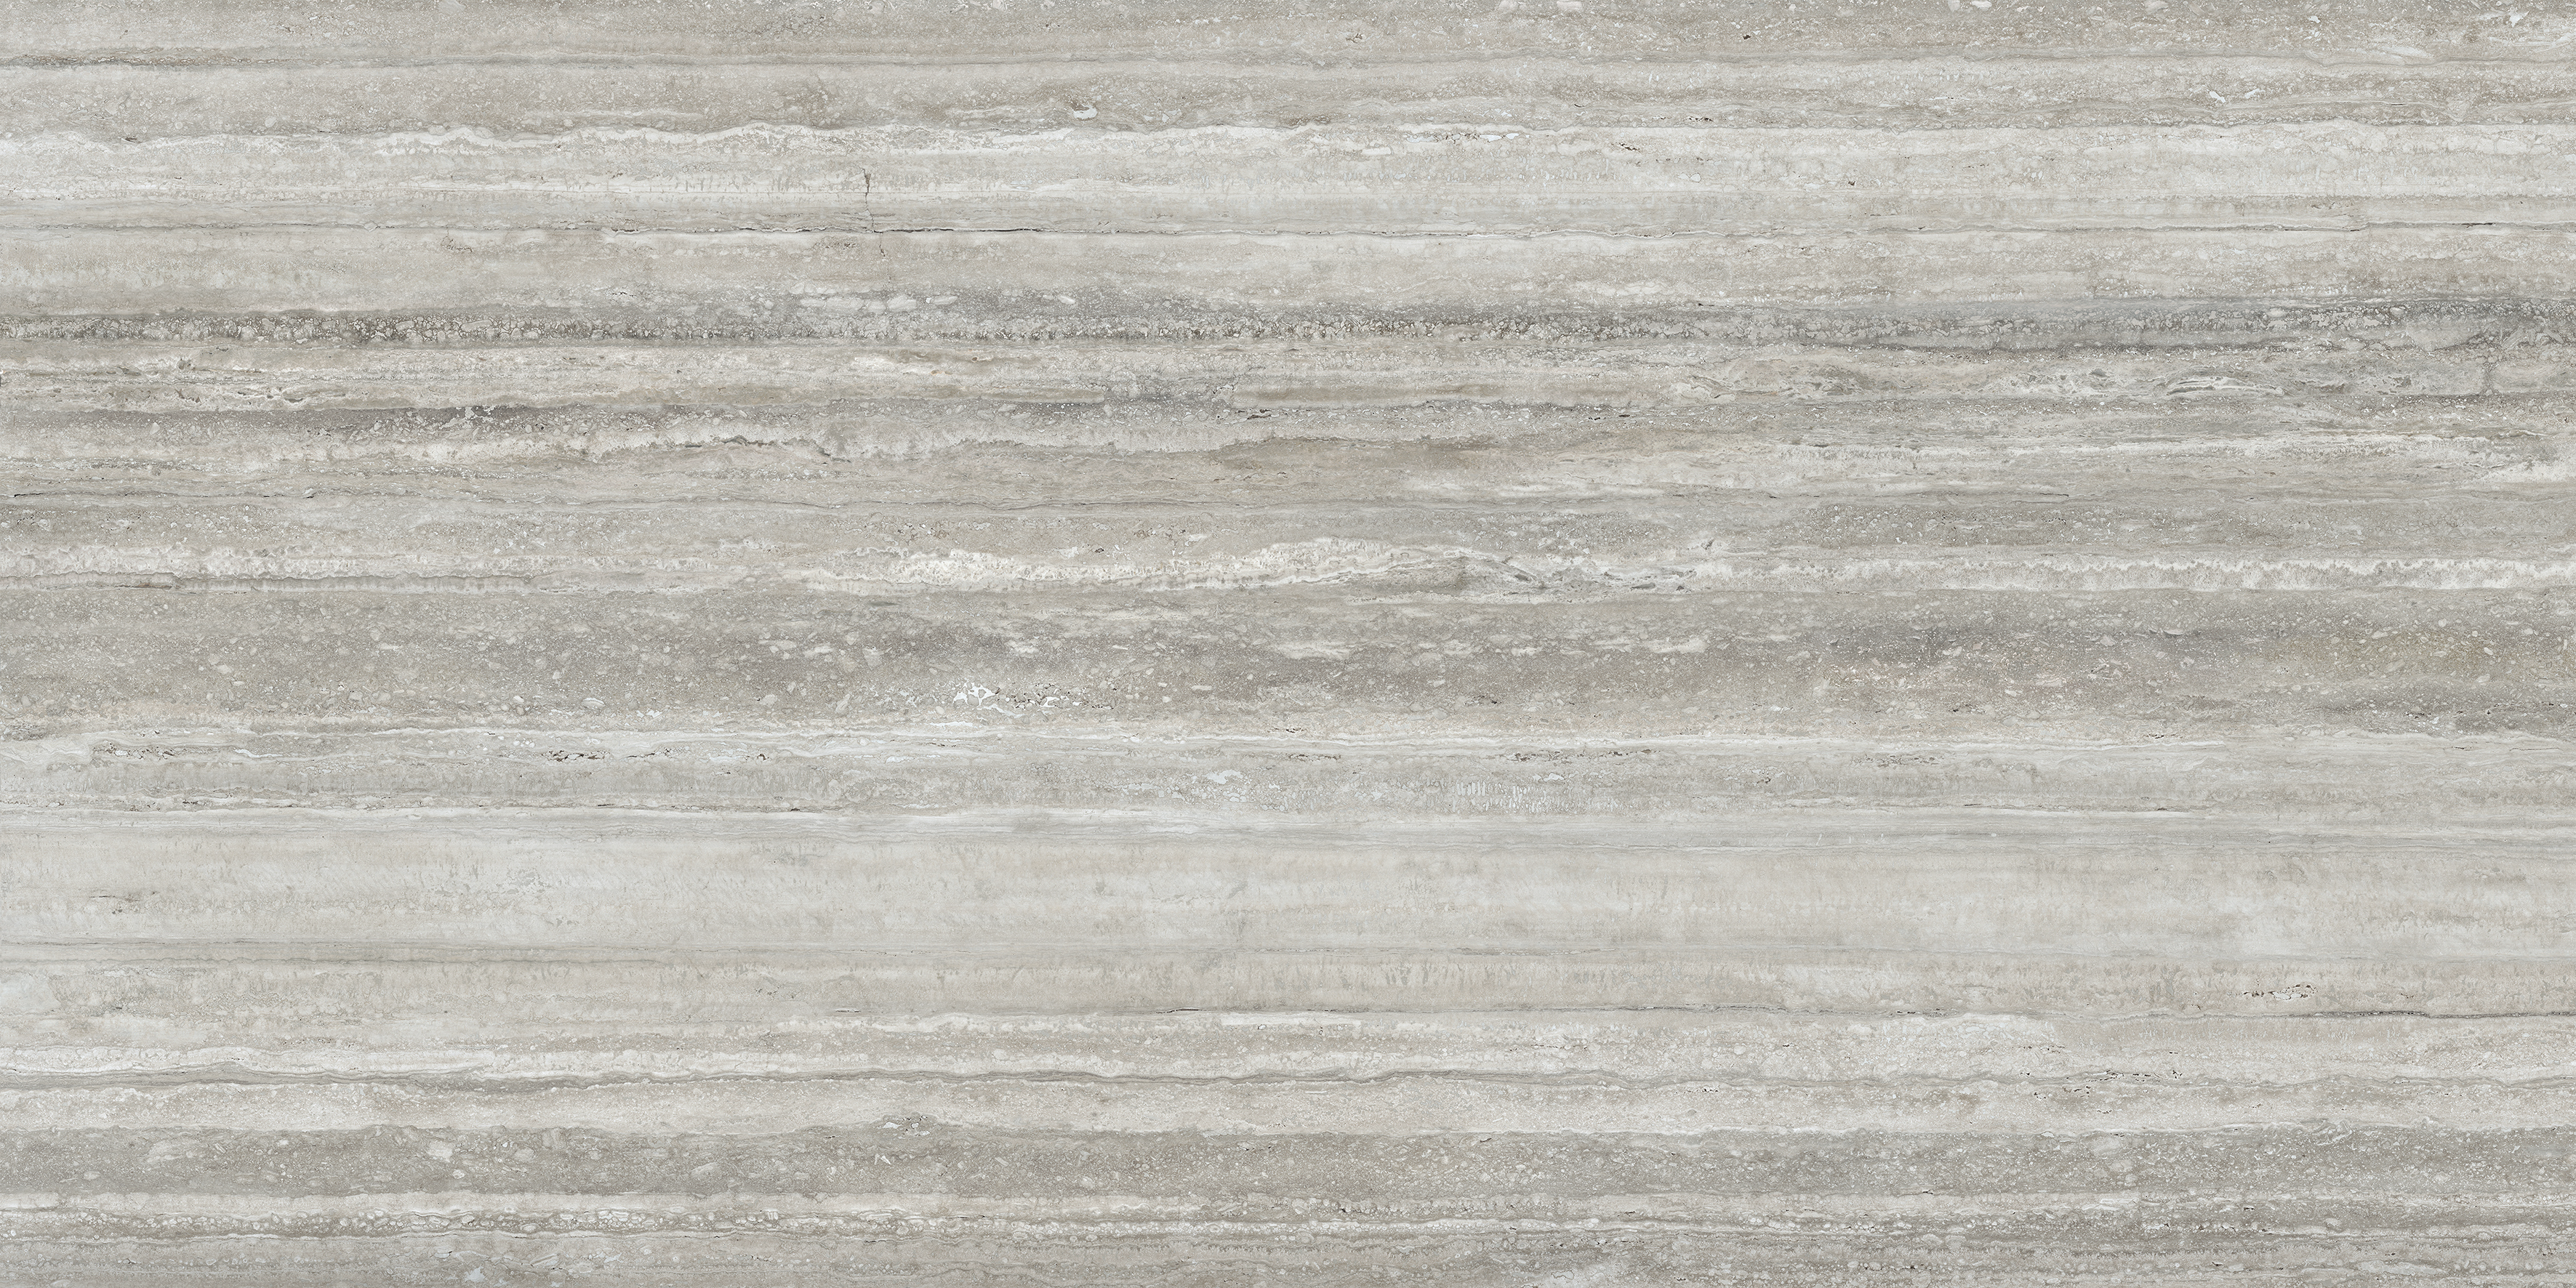 travertino instrata pattern glazed porcelain field tile from la marca anatolia collection distributed by surface group international polished finish rectified edge 12x24 rectangle shape